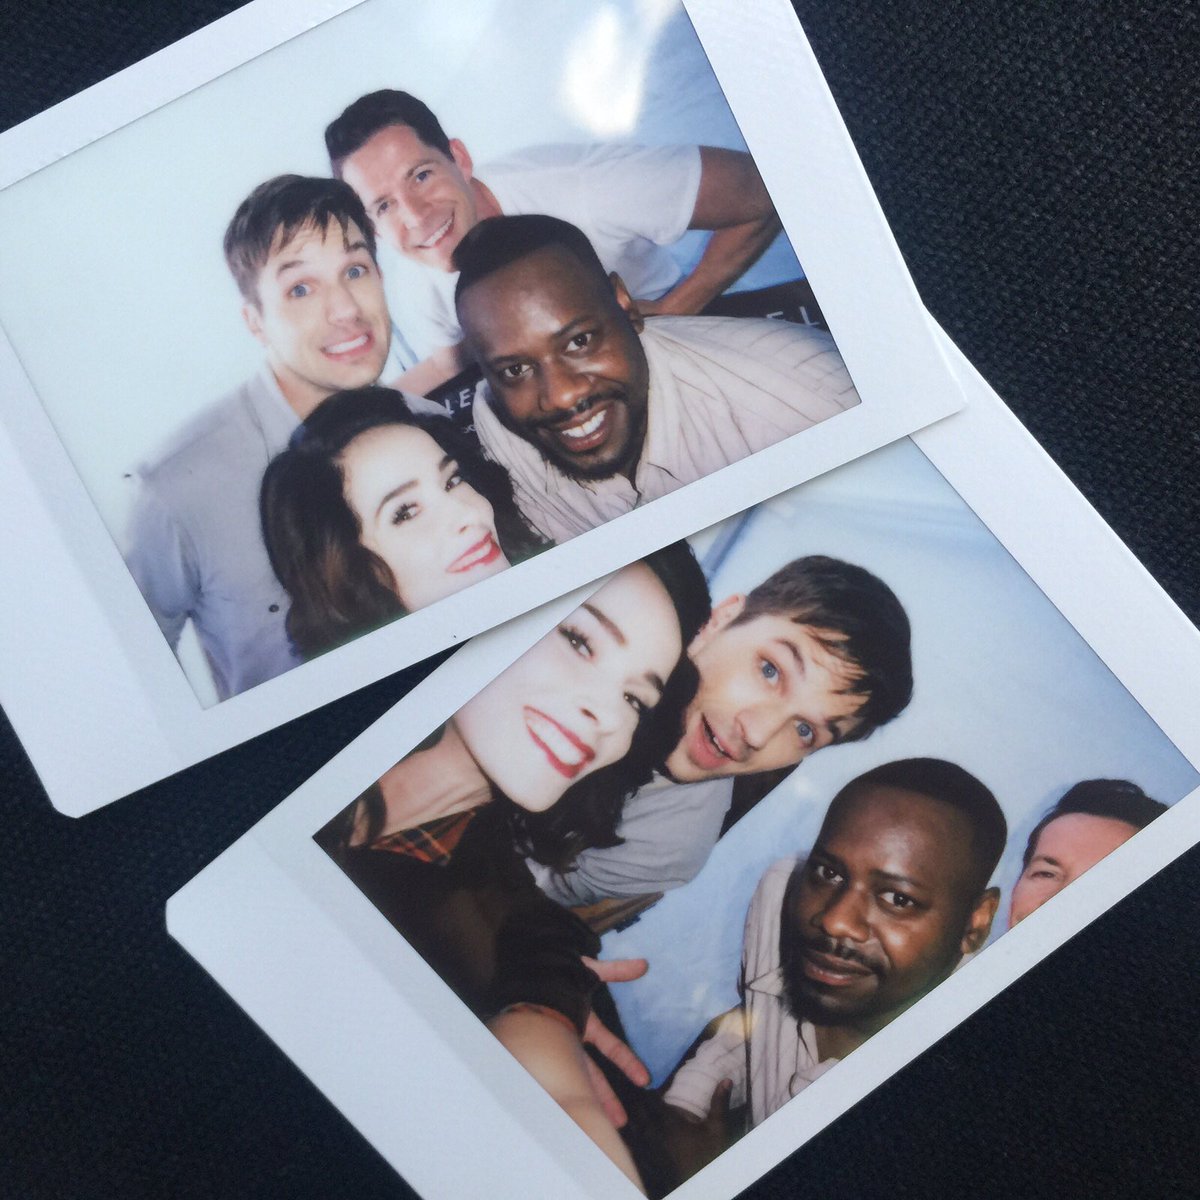 guess who came to play? #SeanMaguire @NBCTimeless @malcolmbarrett @MattLanter https://t.co/CCKfsH605r